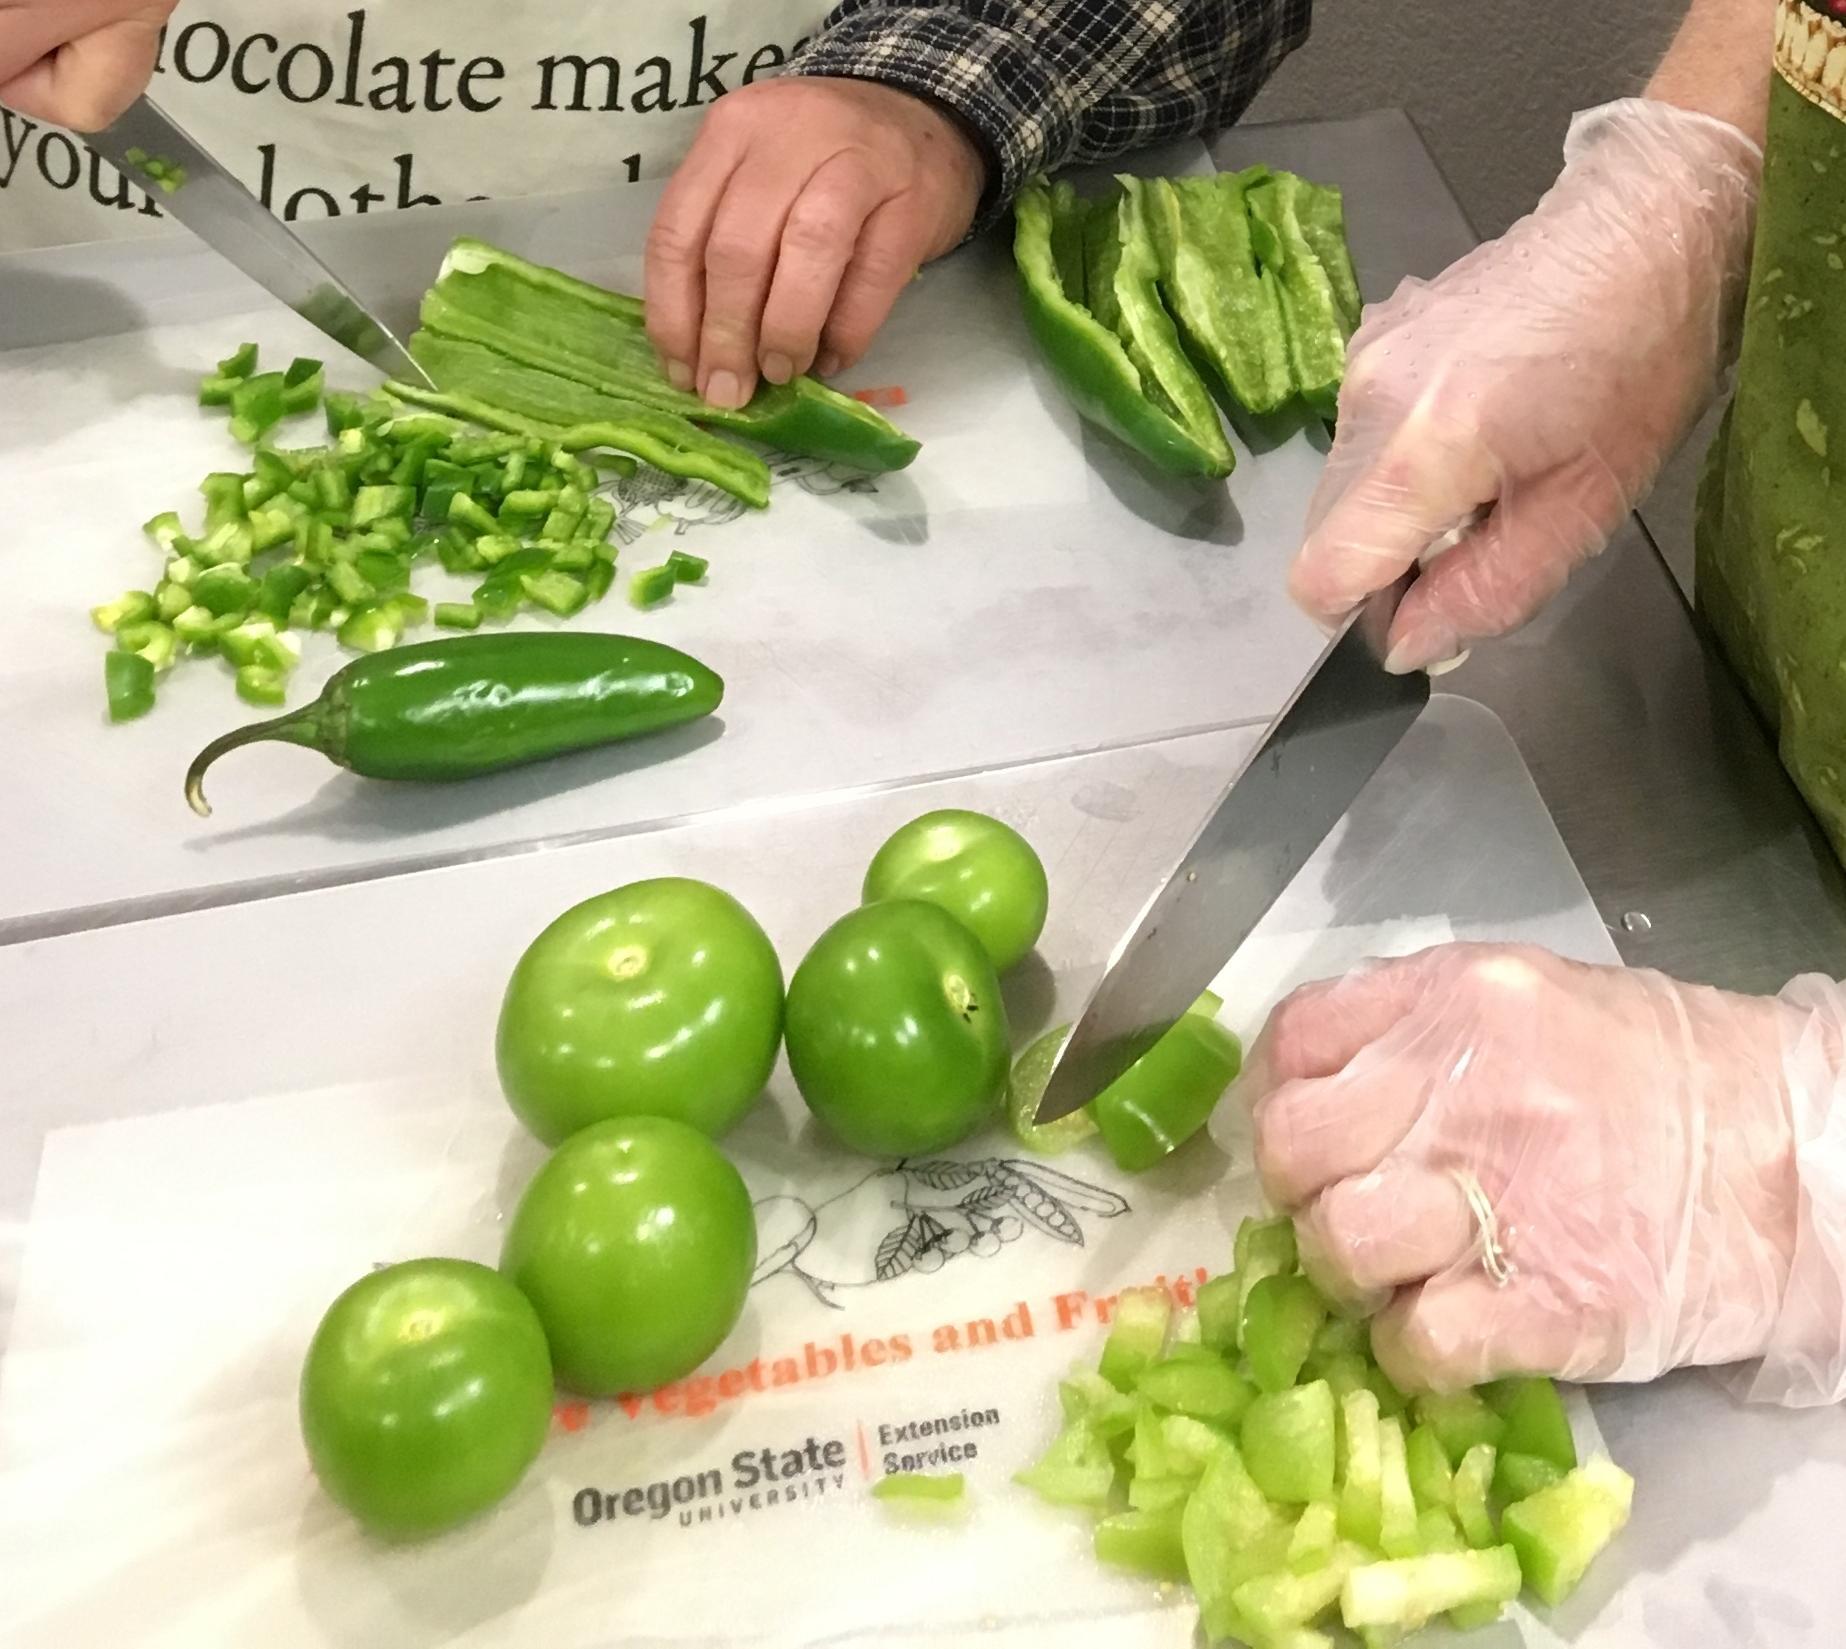 Close-up of the hands of two people, both with knives; one cutting peppers, the other cutting tomatillos.